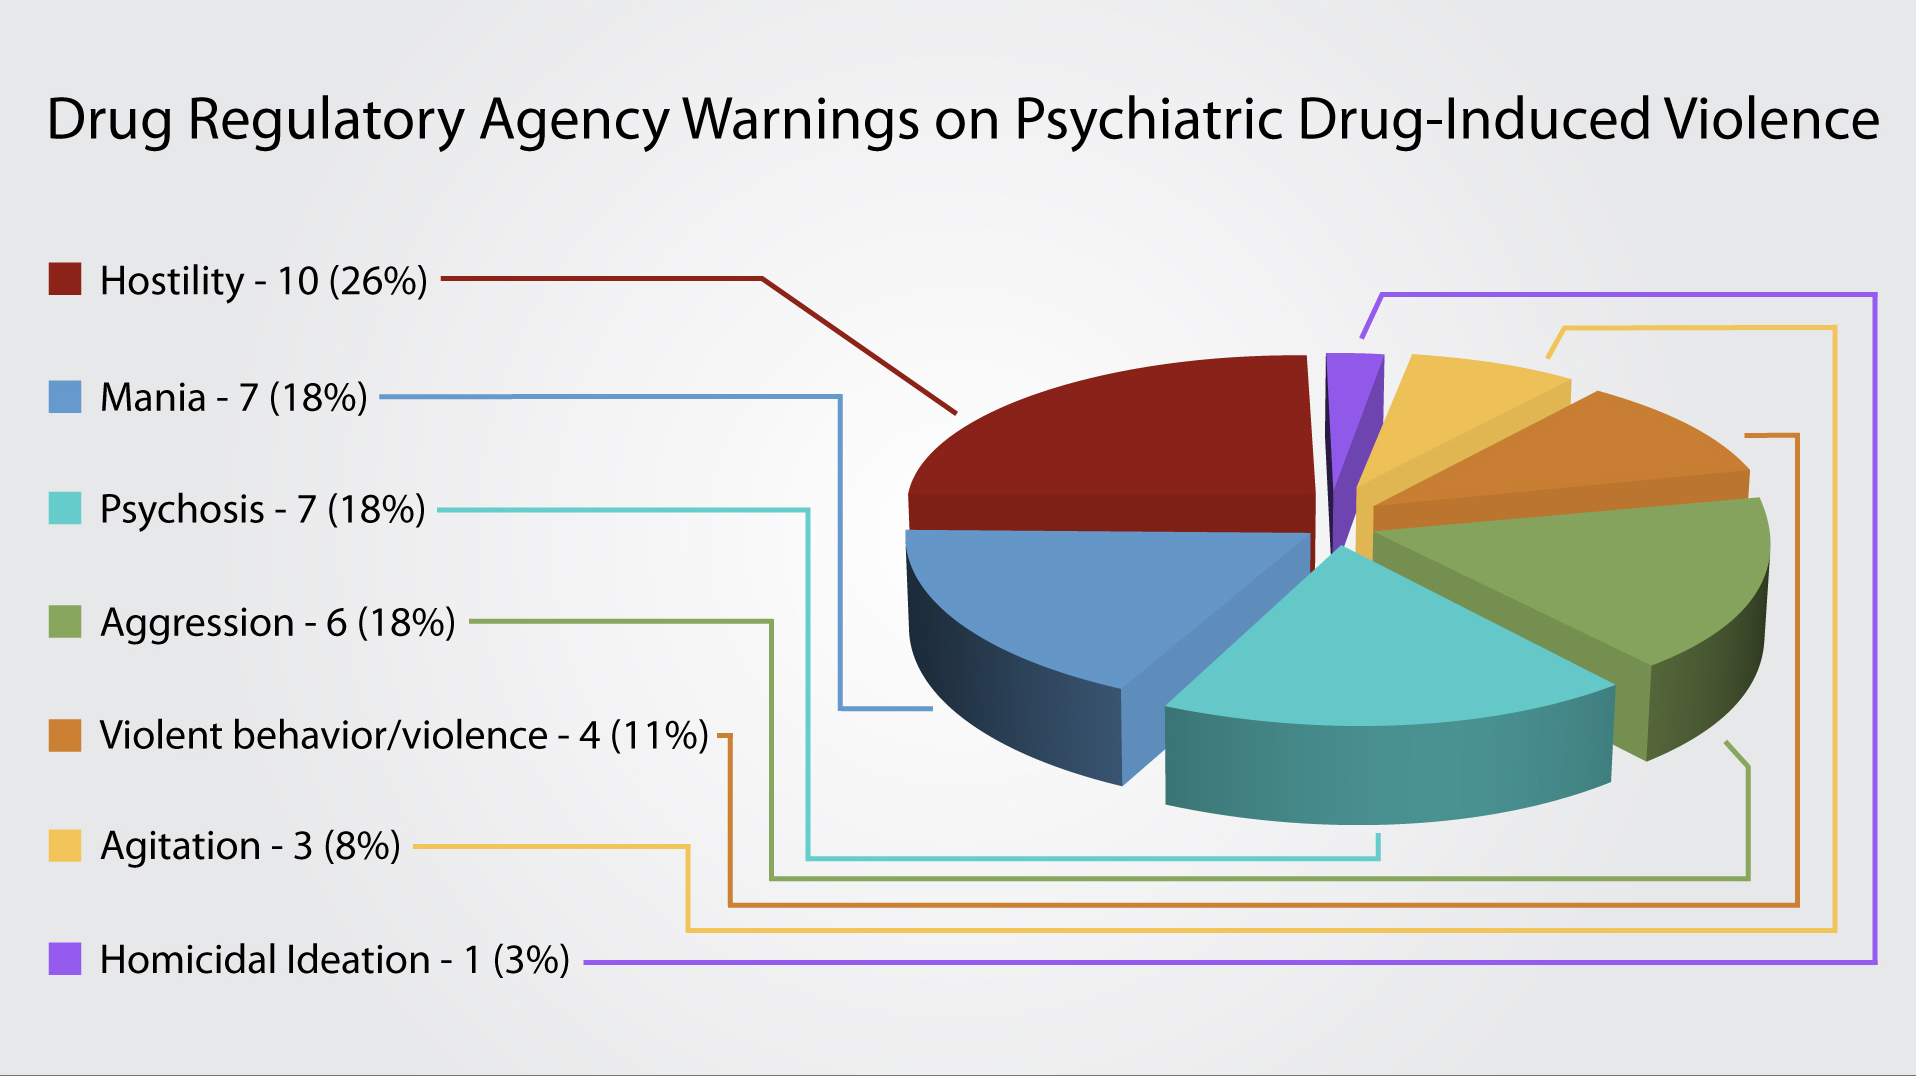 There have been 22 international drug regulatory agency warnings issued on psychiatric drugs causing violent reactions. View graph for details.